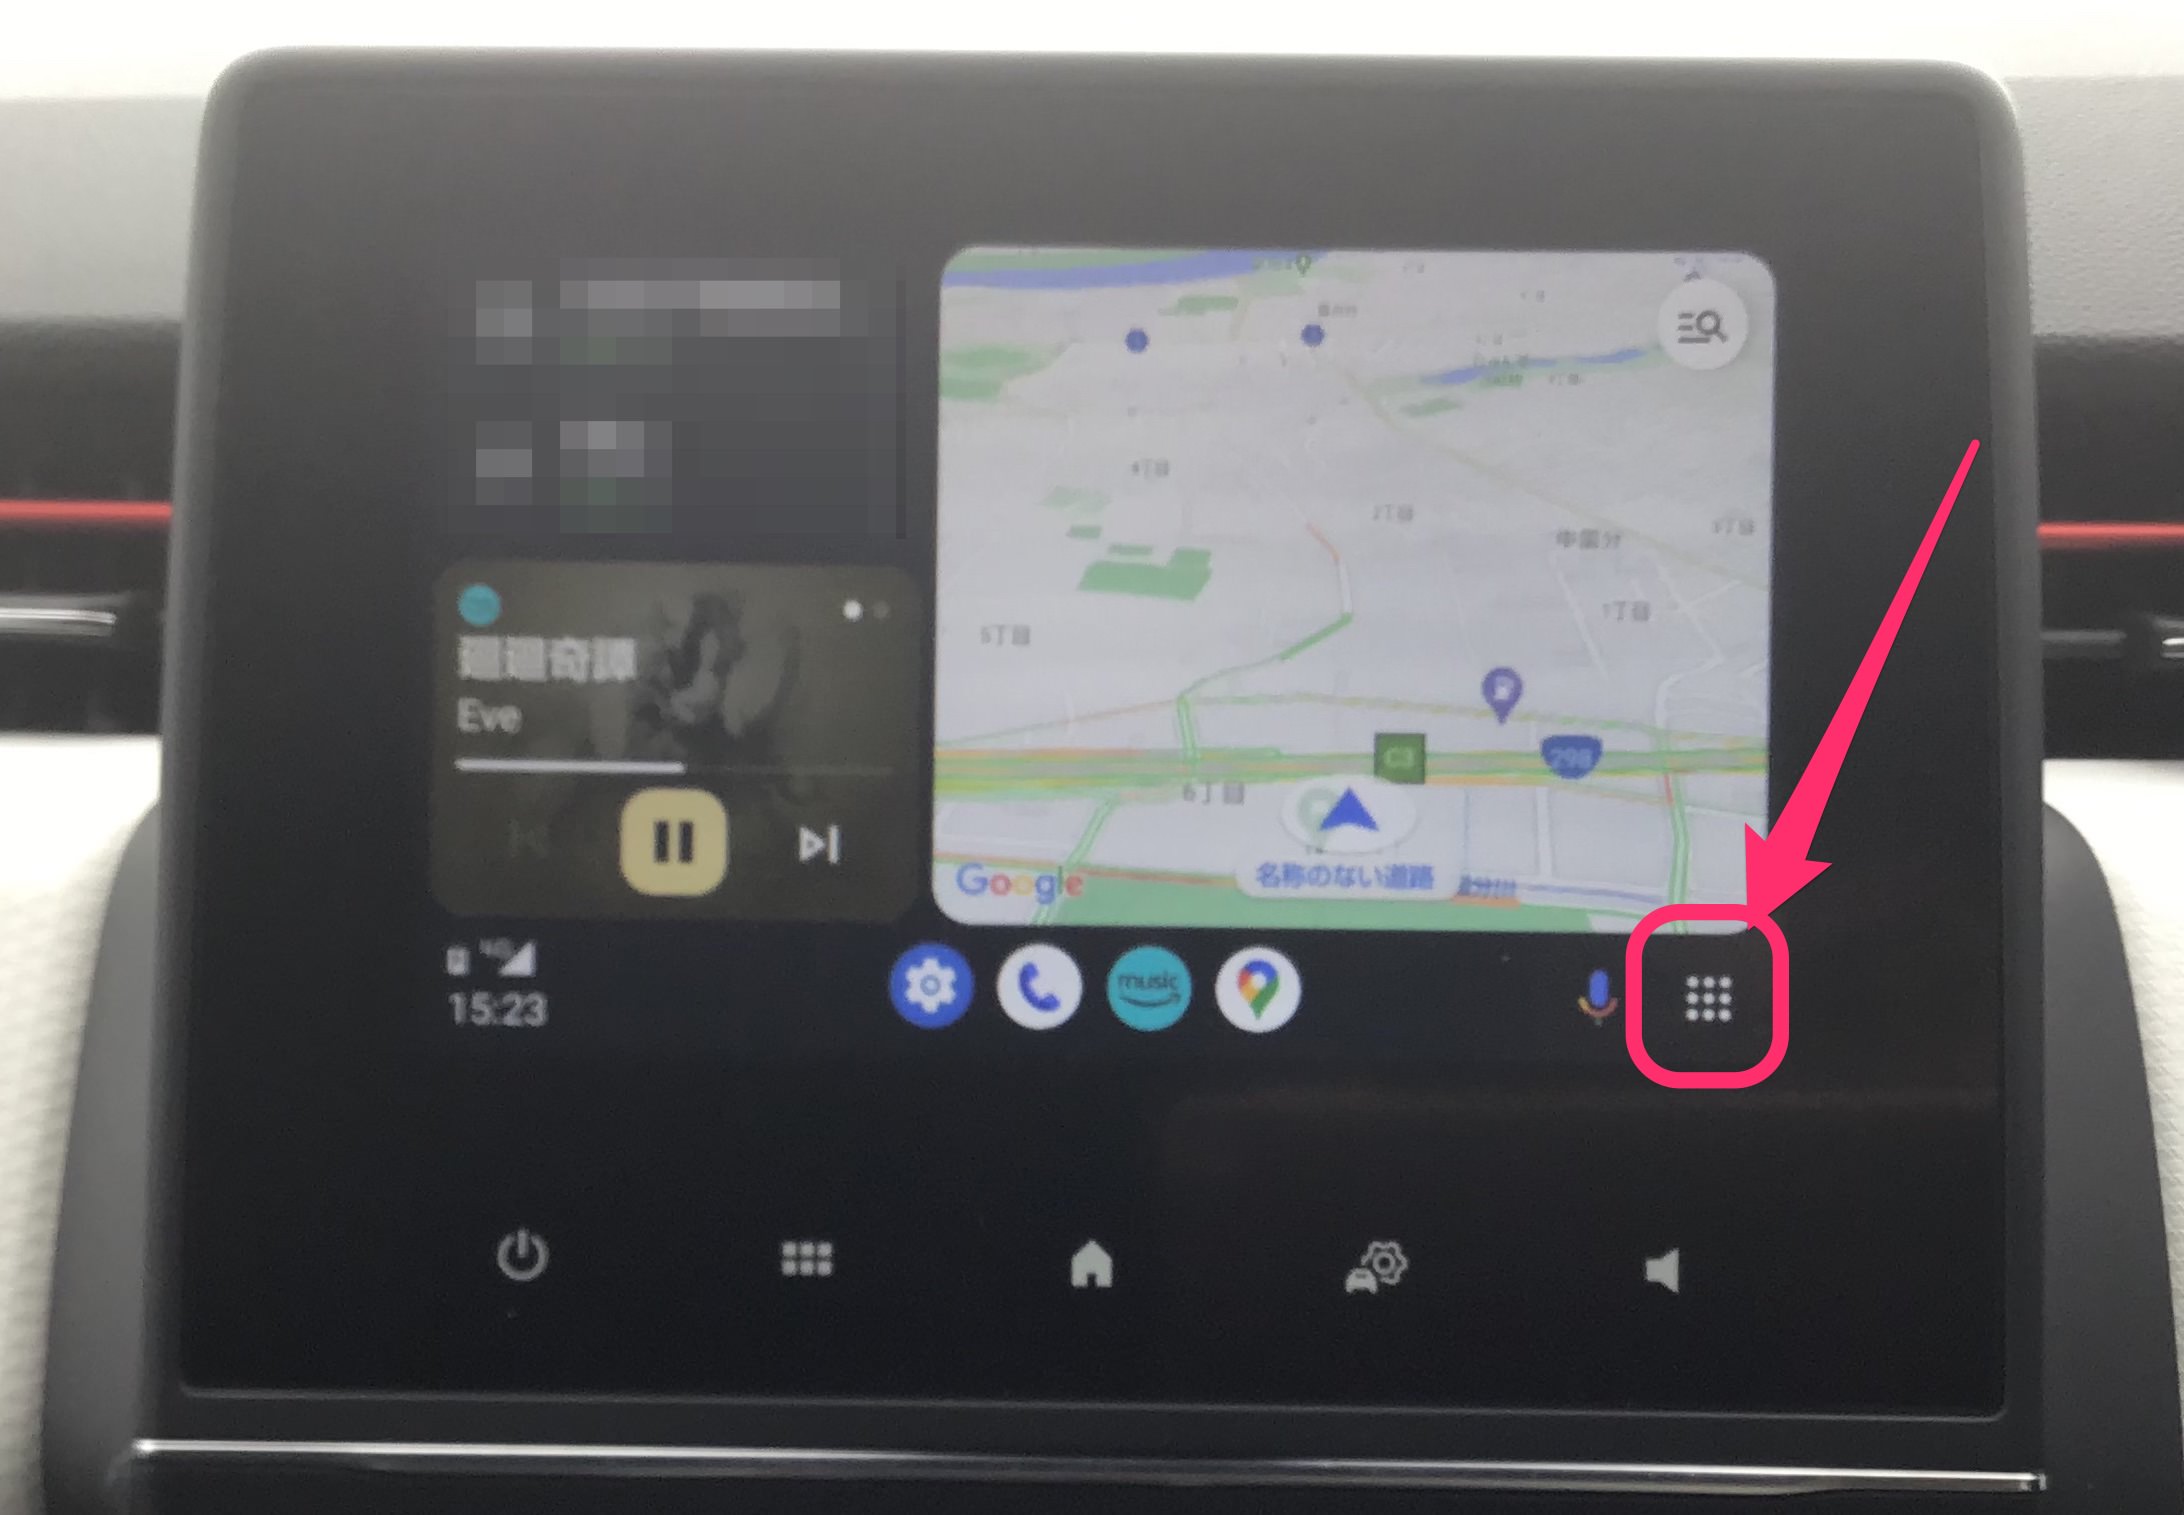 Android Auto　アプリのクイックコントロール表示　2画面